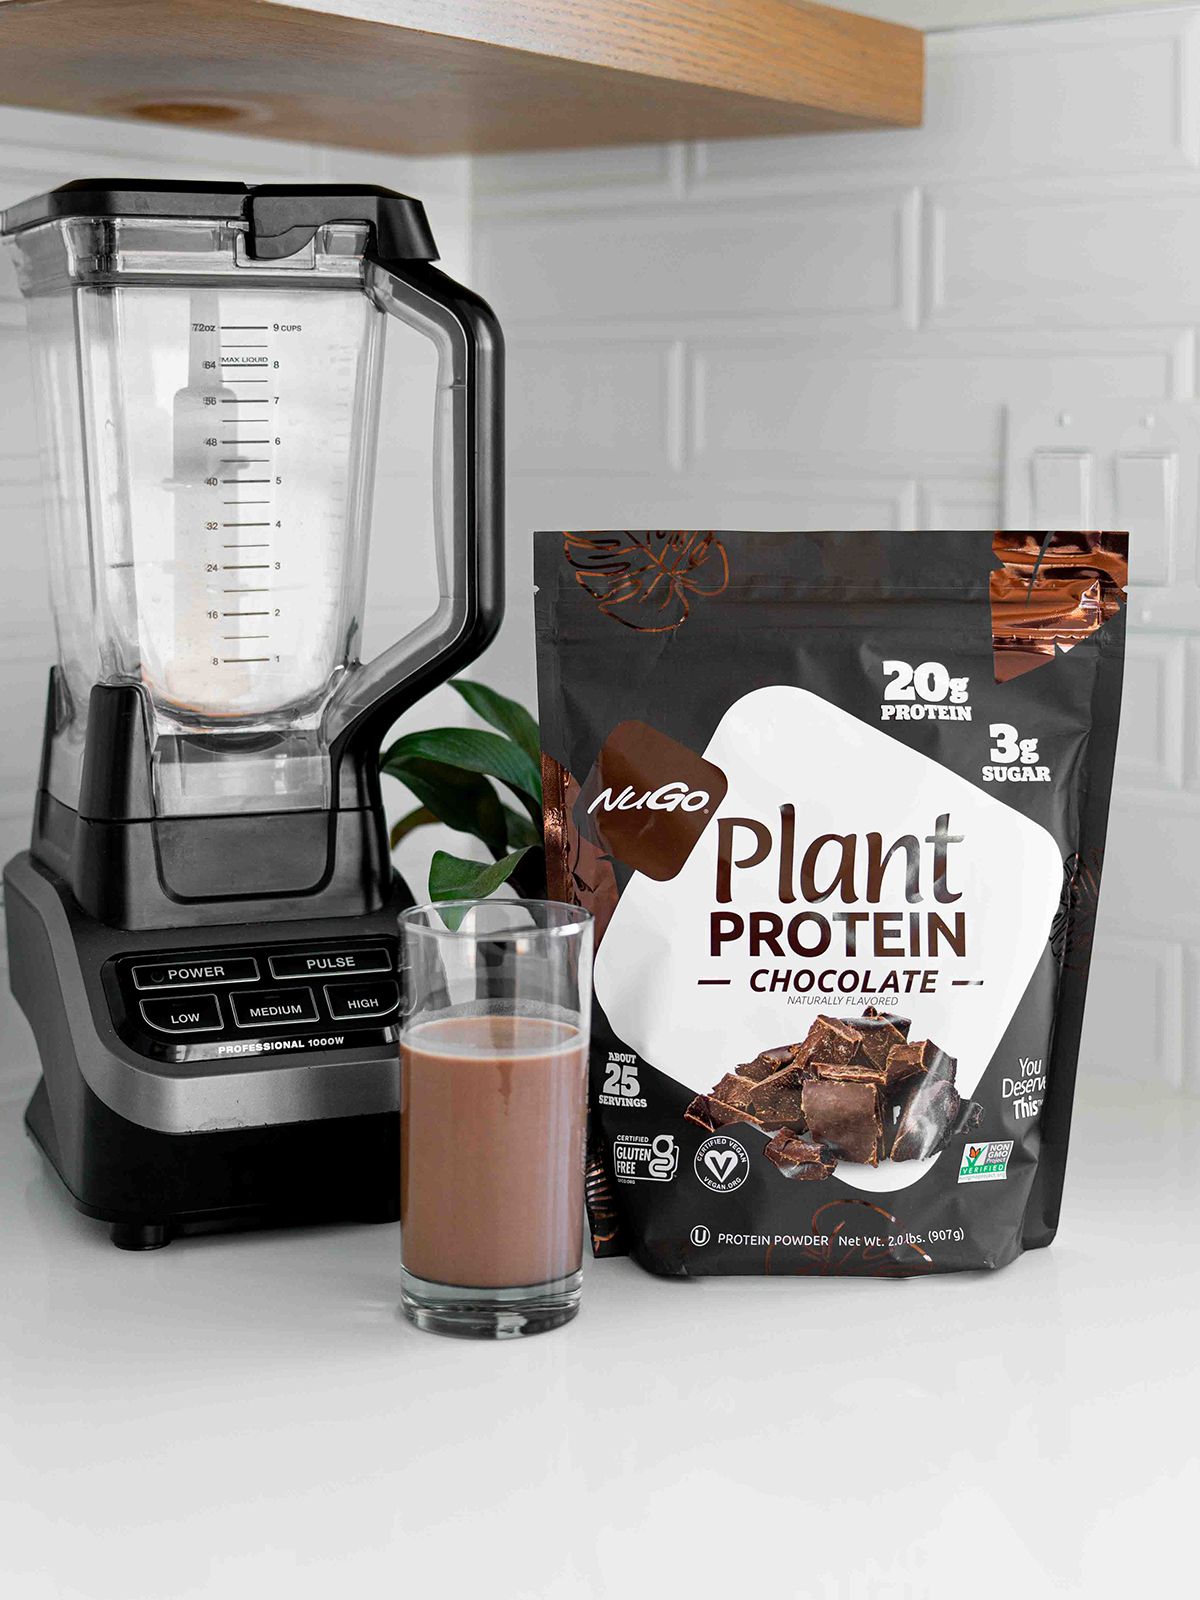 Chocolate Protein powder bag next to blender and glass of protein drink